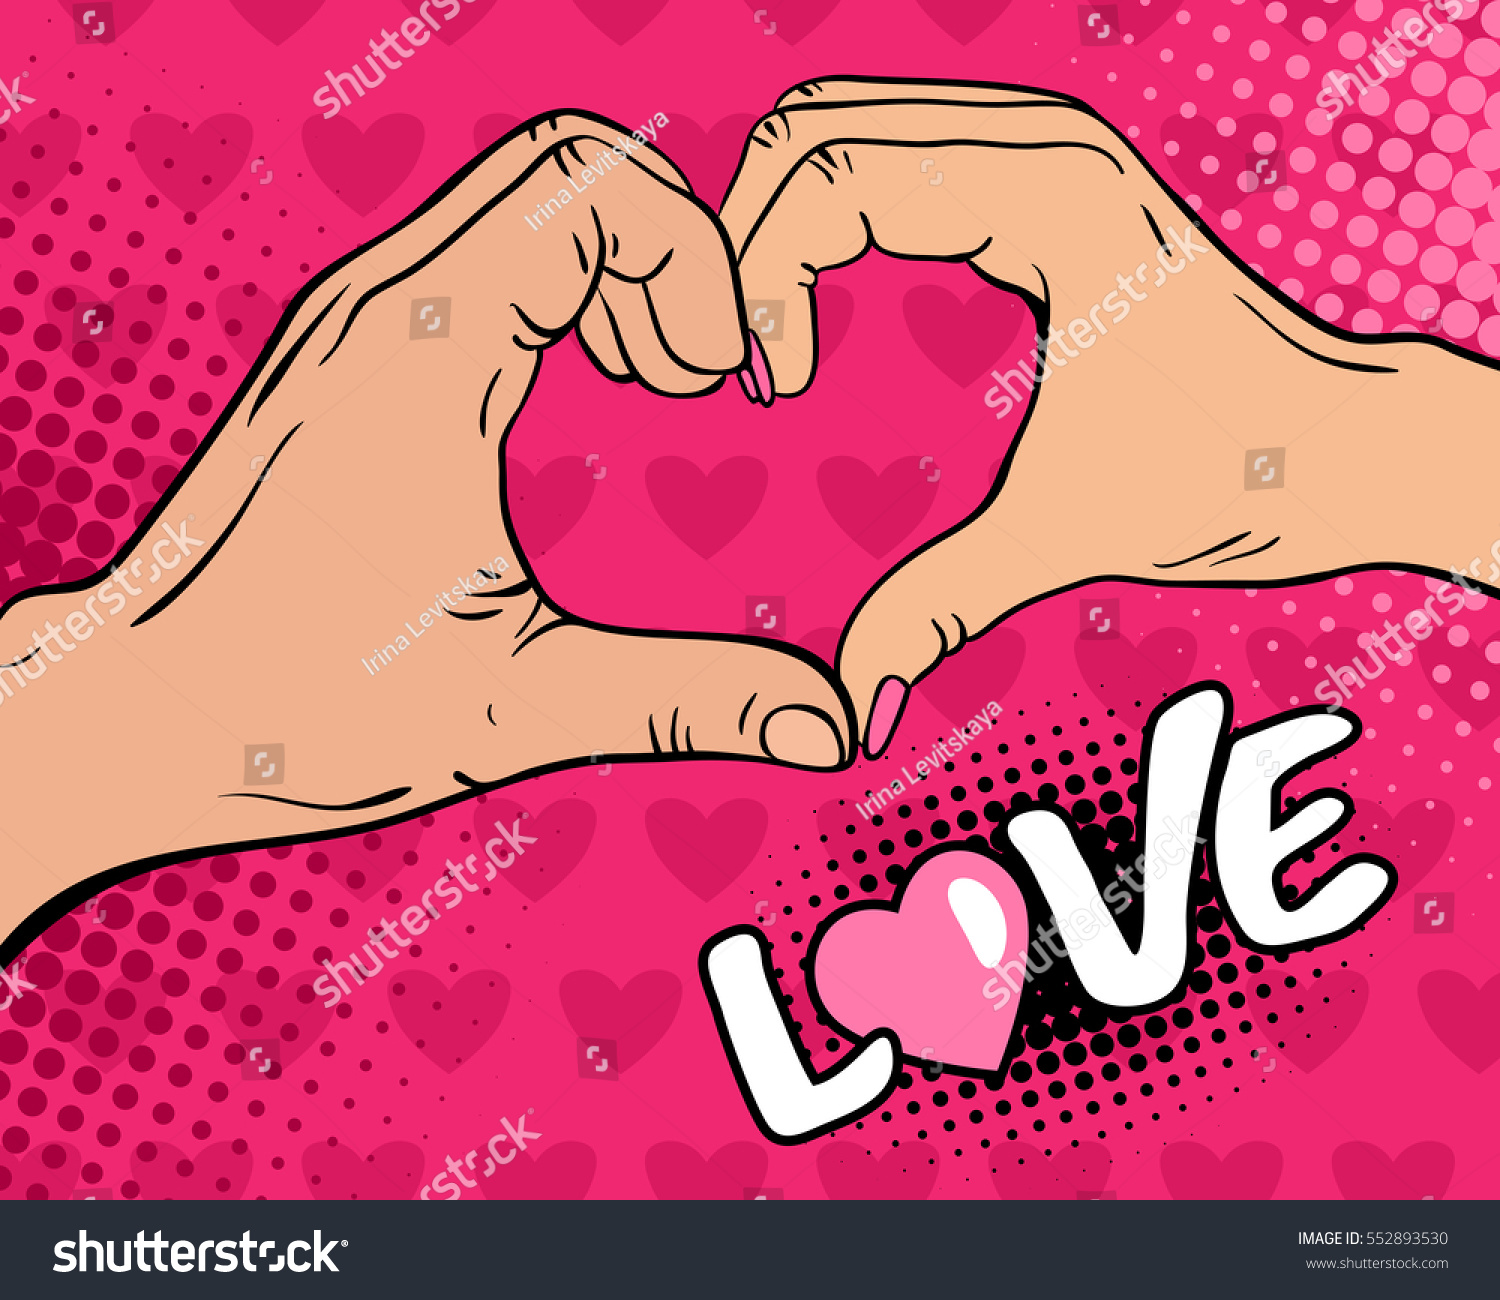 Love. Pop art background with female and male hands with heart sign. Vector colorful hand drawn illustration in retro comic style on pink hearts background. #552893530